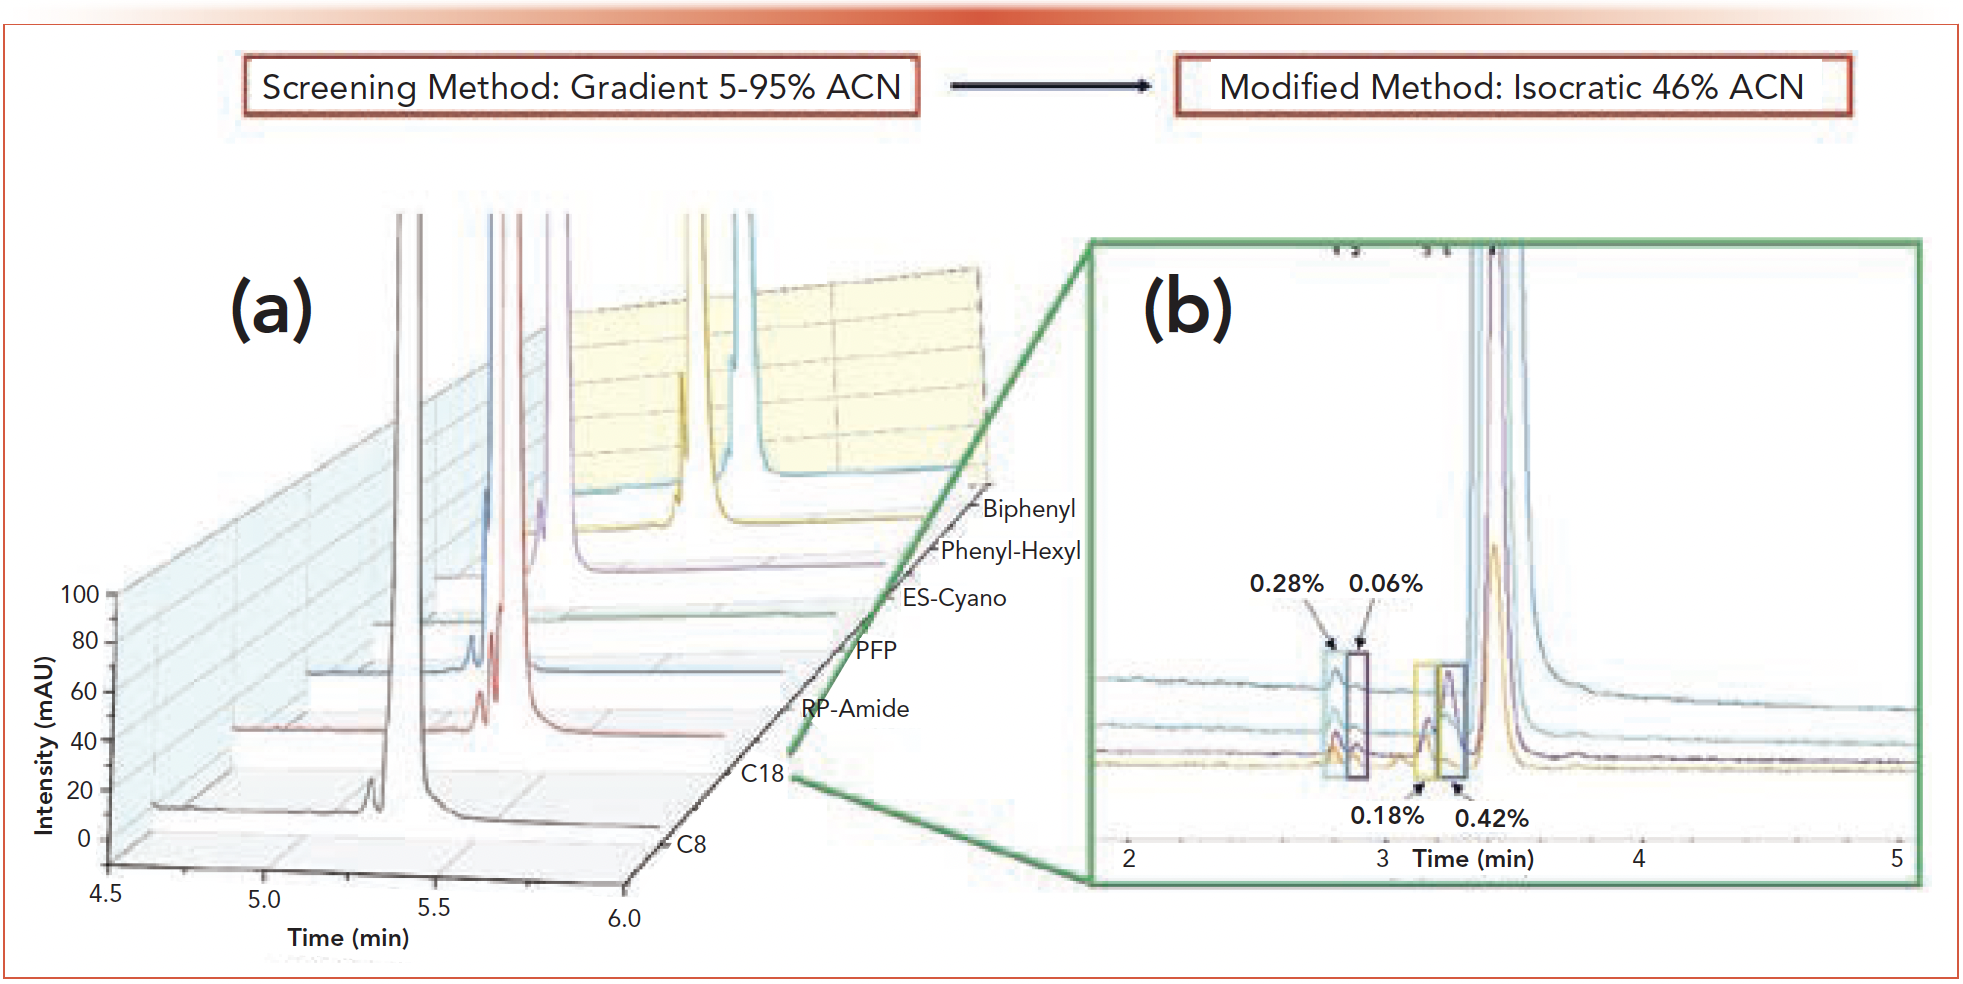 FIGURE 4: (a) 2nd dimension chromatograms for API 2 using 25 mM ammonium acetate pH 4.5. These results constitute the best resolution achieved with the screening protocol. In no chromatogram were all four impurities resolved from the API. (b) Results of HiRes heart cutting using the modified method on the C18 column. Peak area percentages are relative to the API peak.